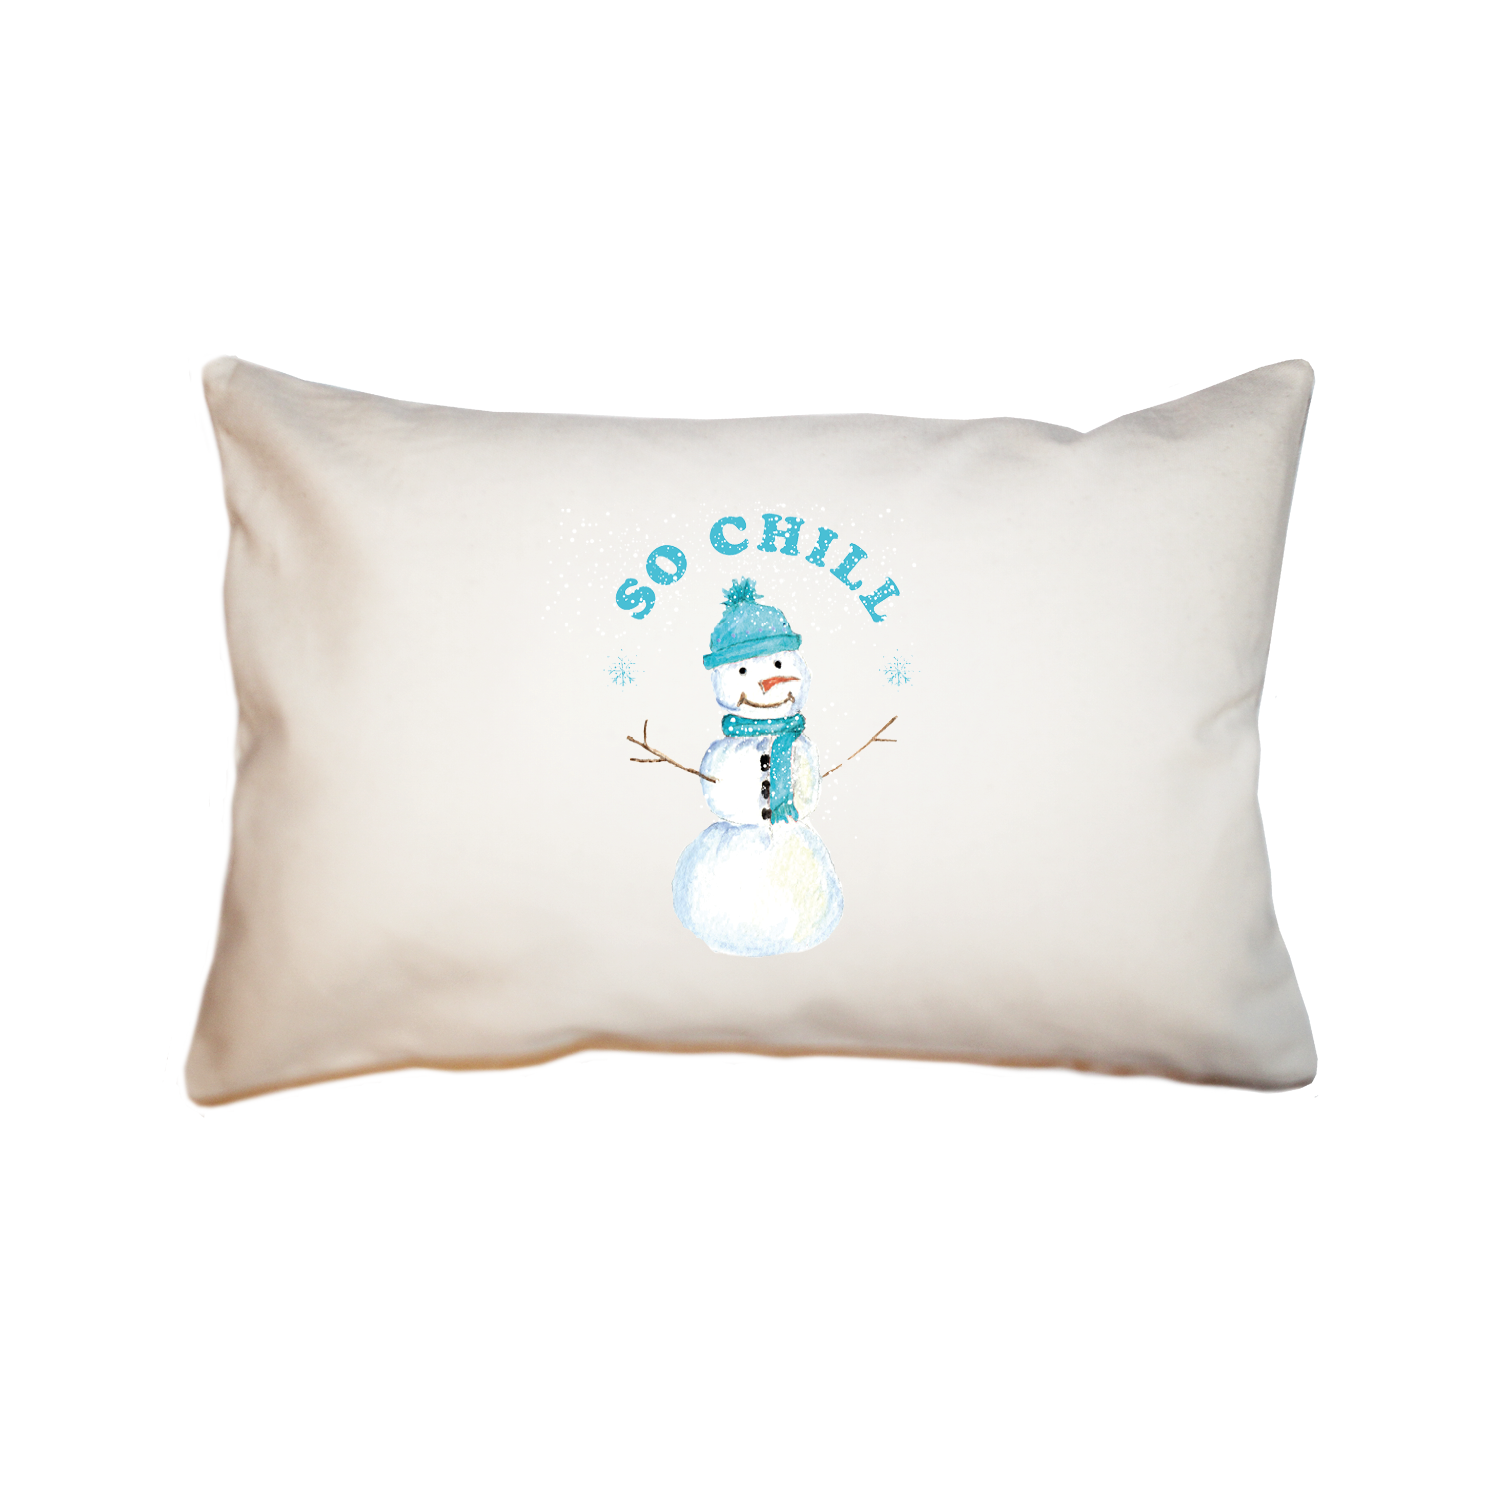 so chill snowman large rectangle pillow